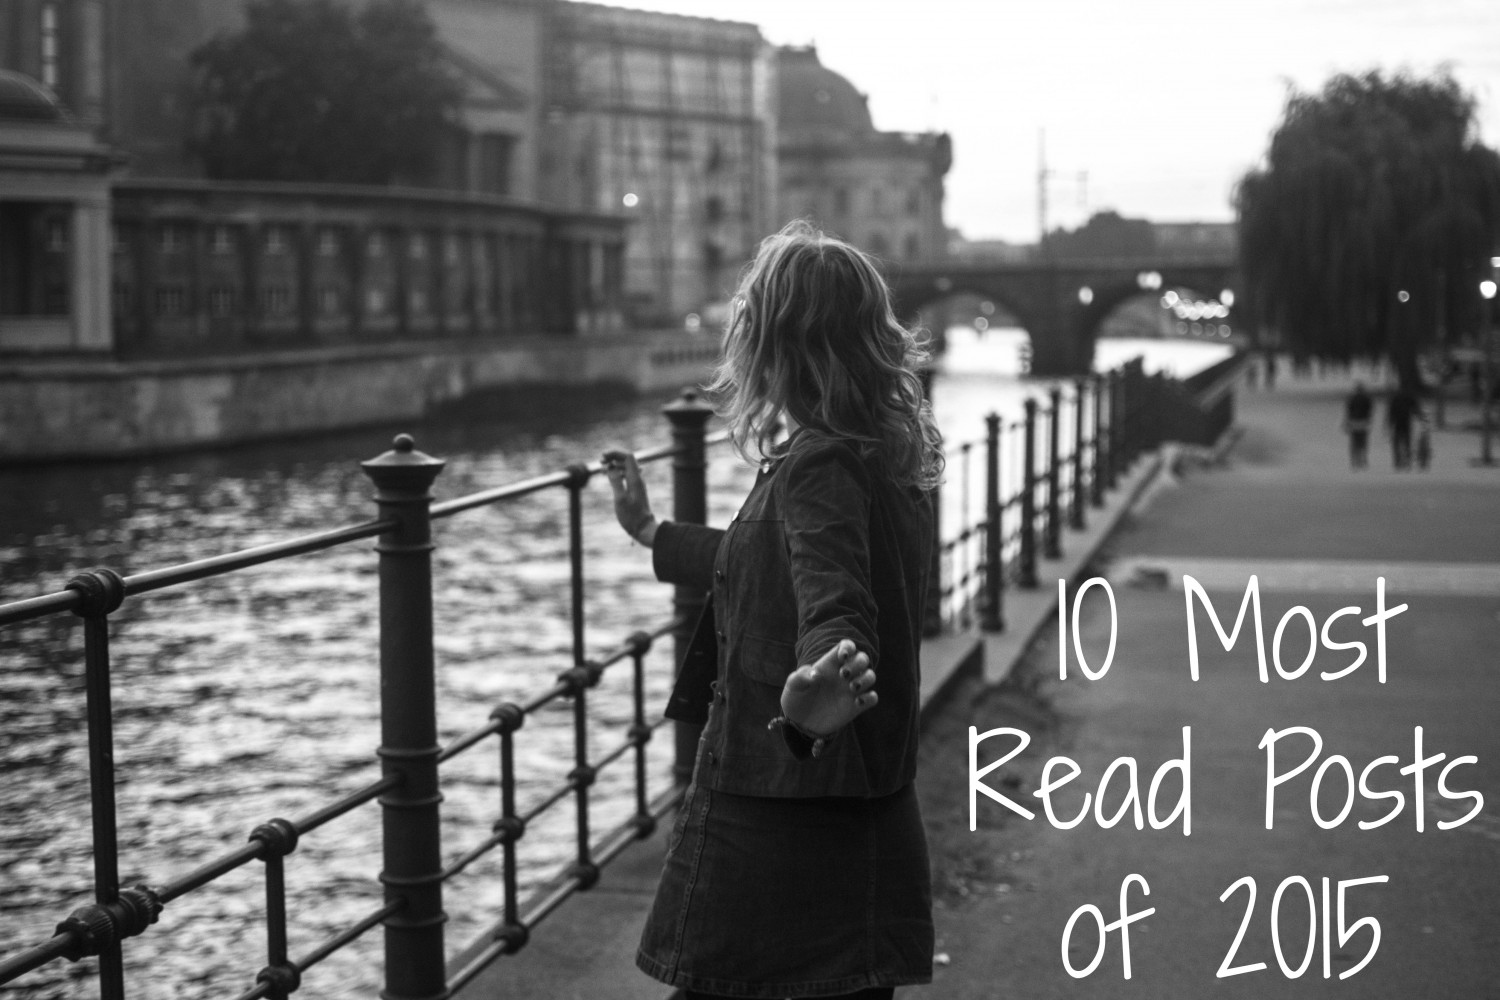 10 most read posts of 2015